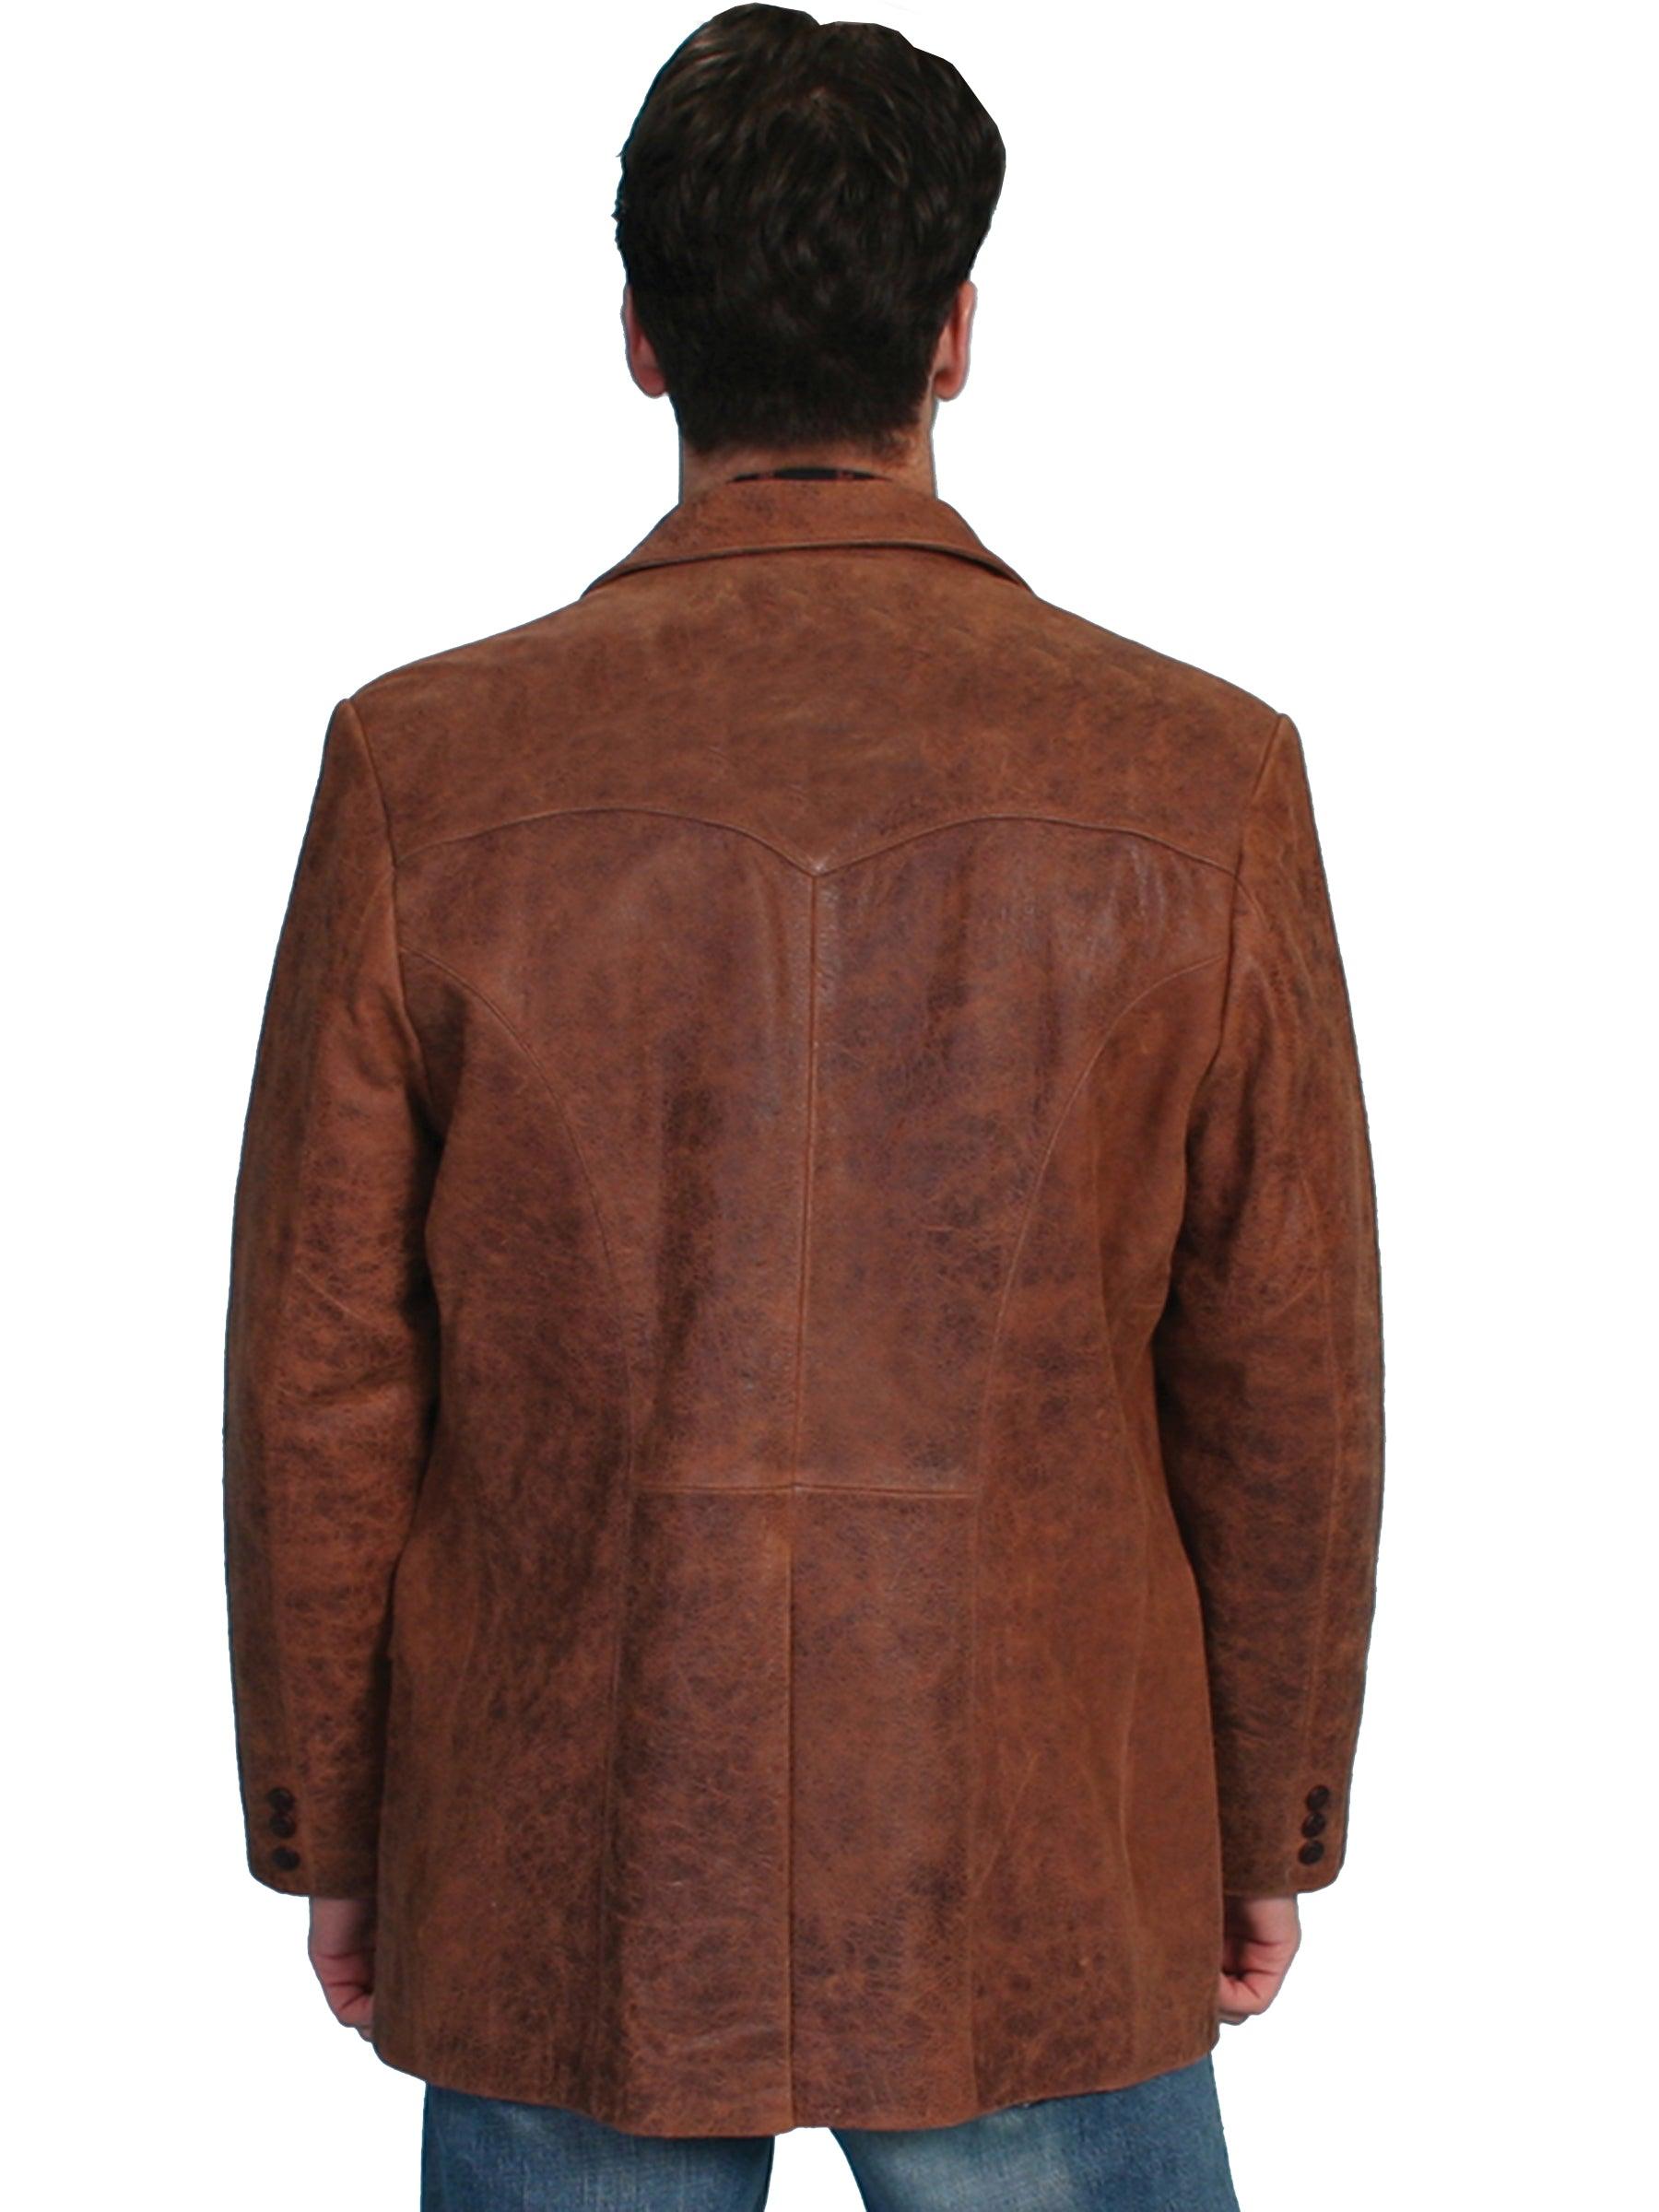 Scully BROWN CAIMAN INSET BLAZER - Flyclothing LLC